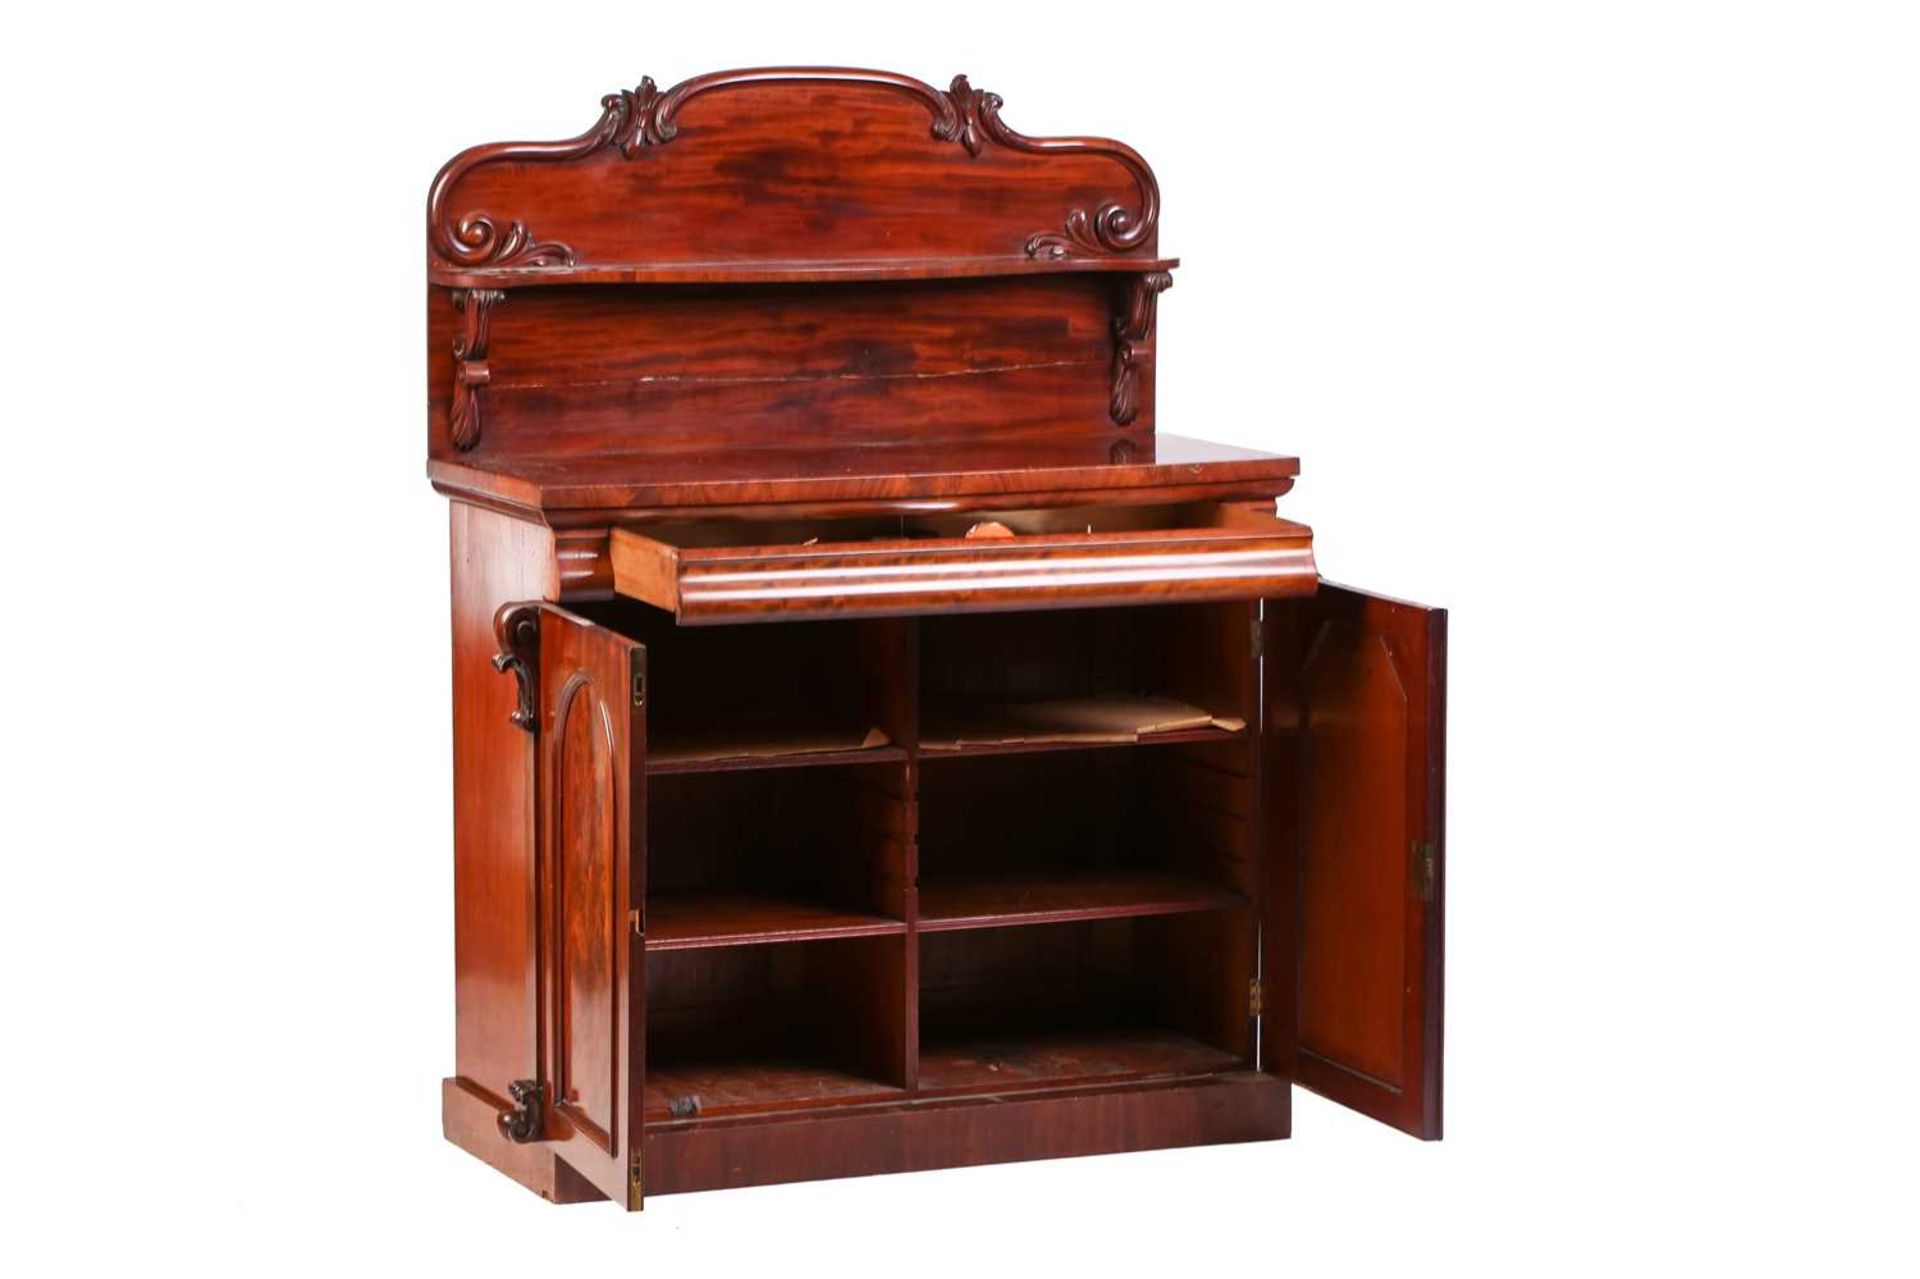 Victorian mahogany chiffonier with an ogee moulded frieze drawer above a pair of arched panel - Image 2 of 6